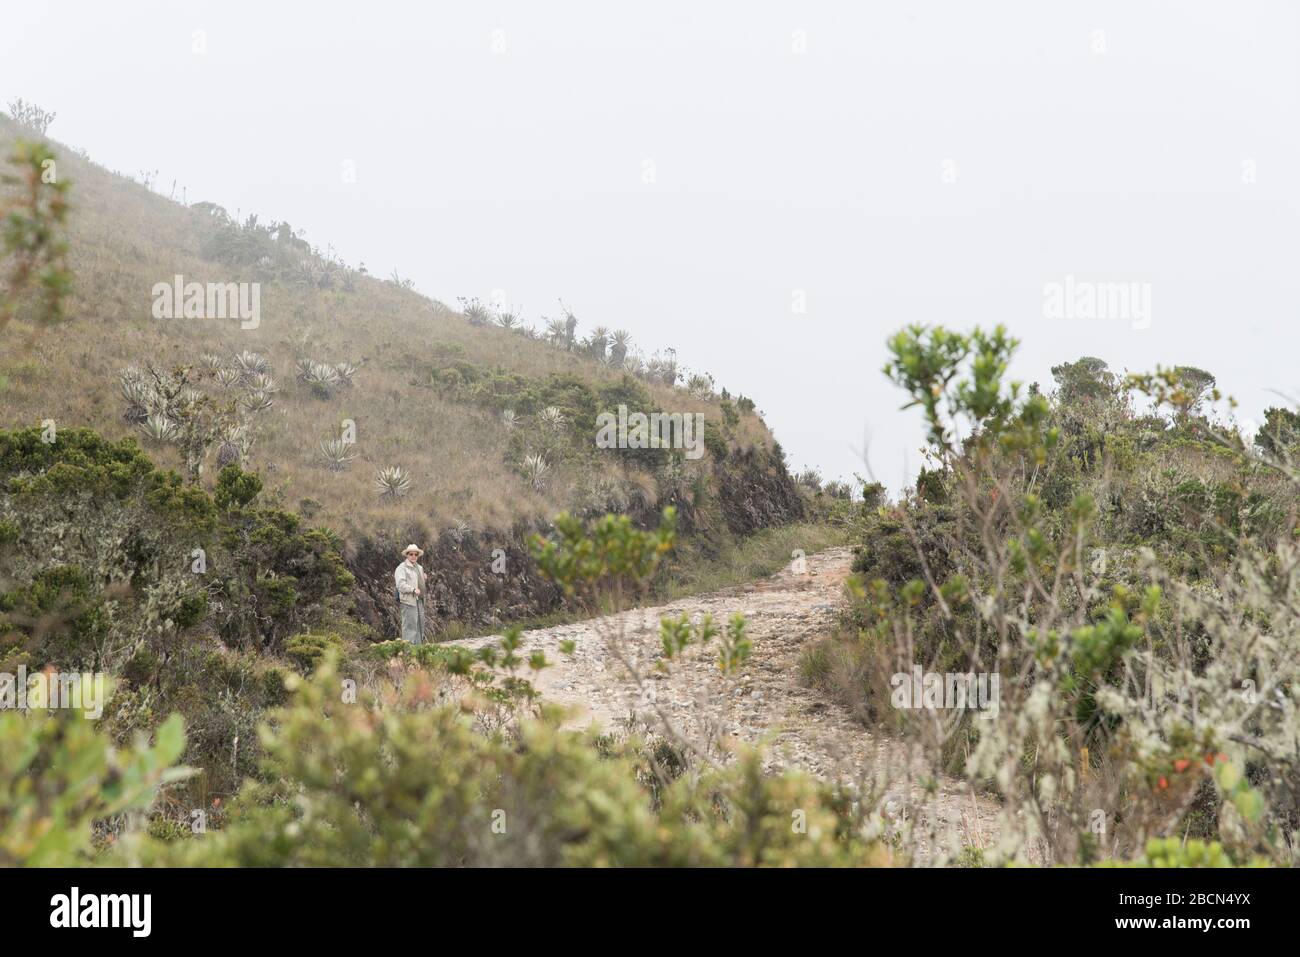 Chingaza National Natural Park, Colombia. Paramo landscape: man on a trail running up a hill, surrounded by greenery, a cloudy and foggy day Stock Photo